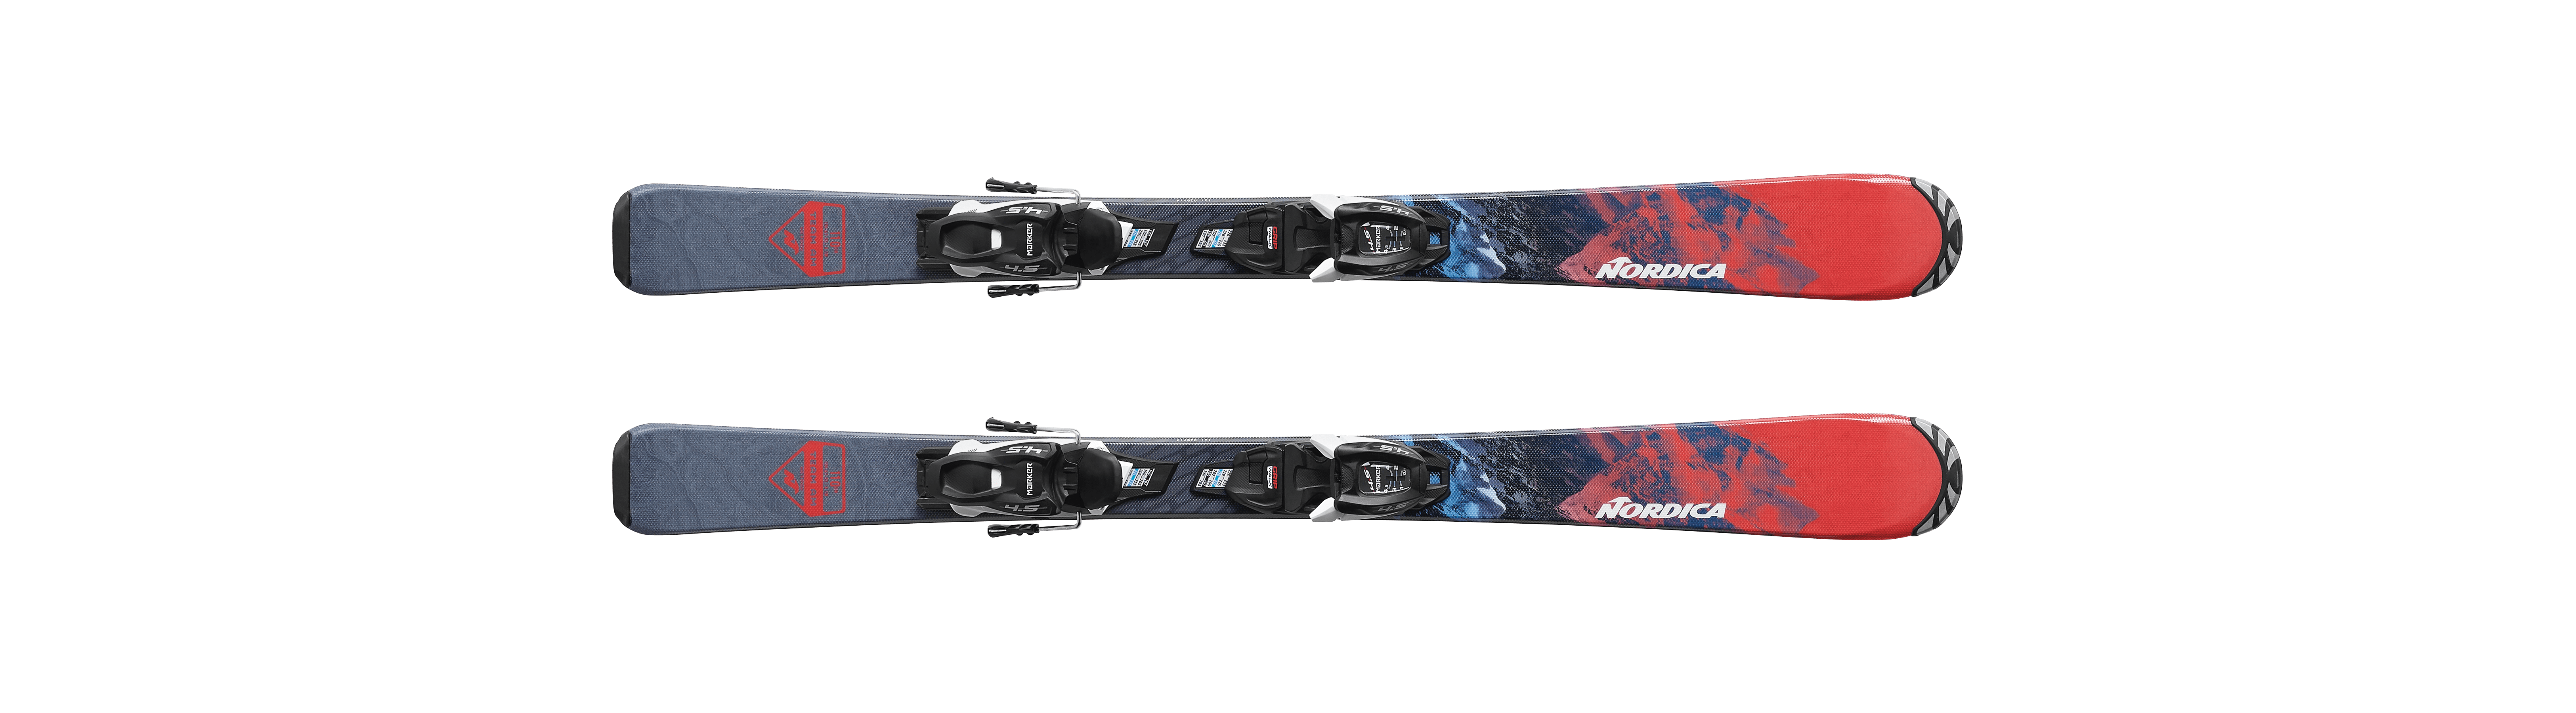 Picture of the Nordica Team am fdt (110-150) skis.